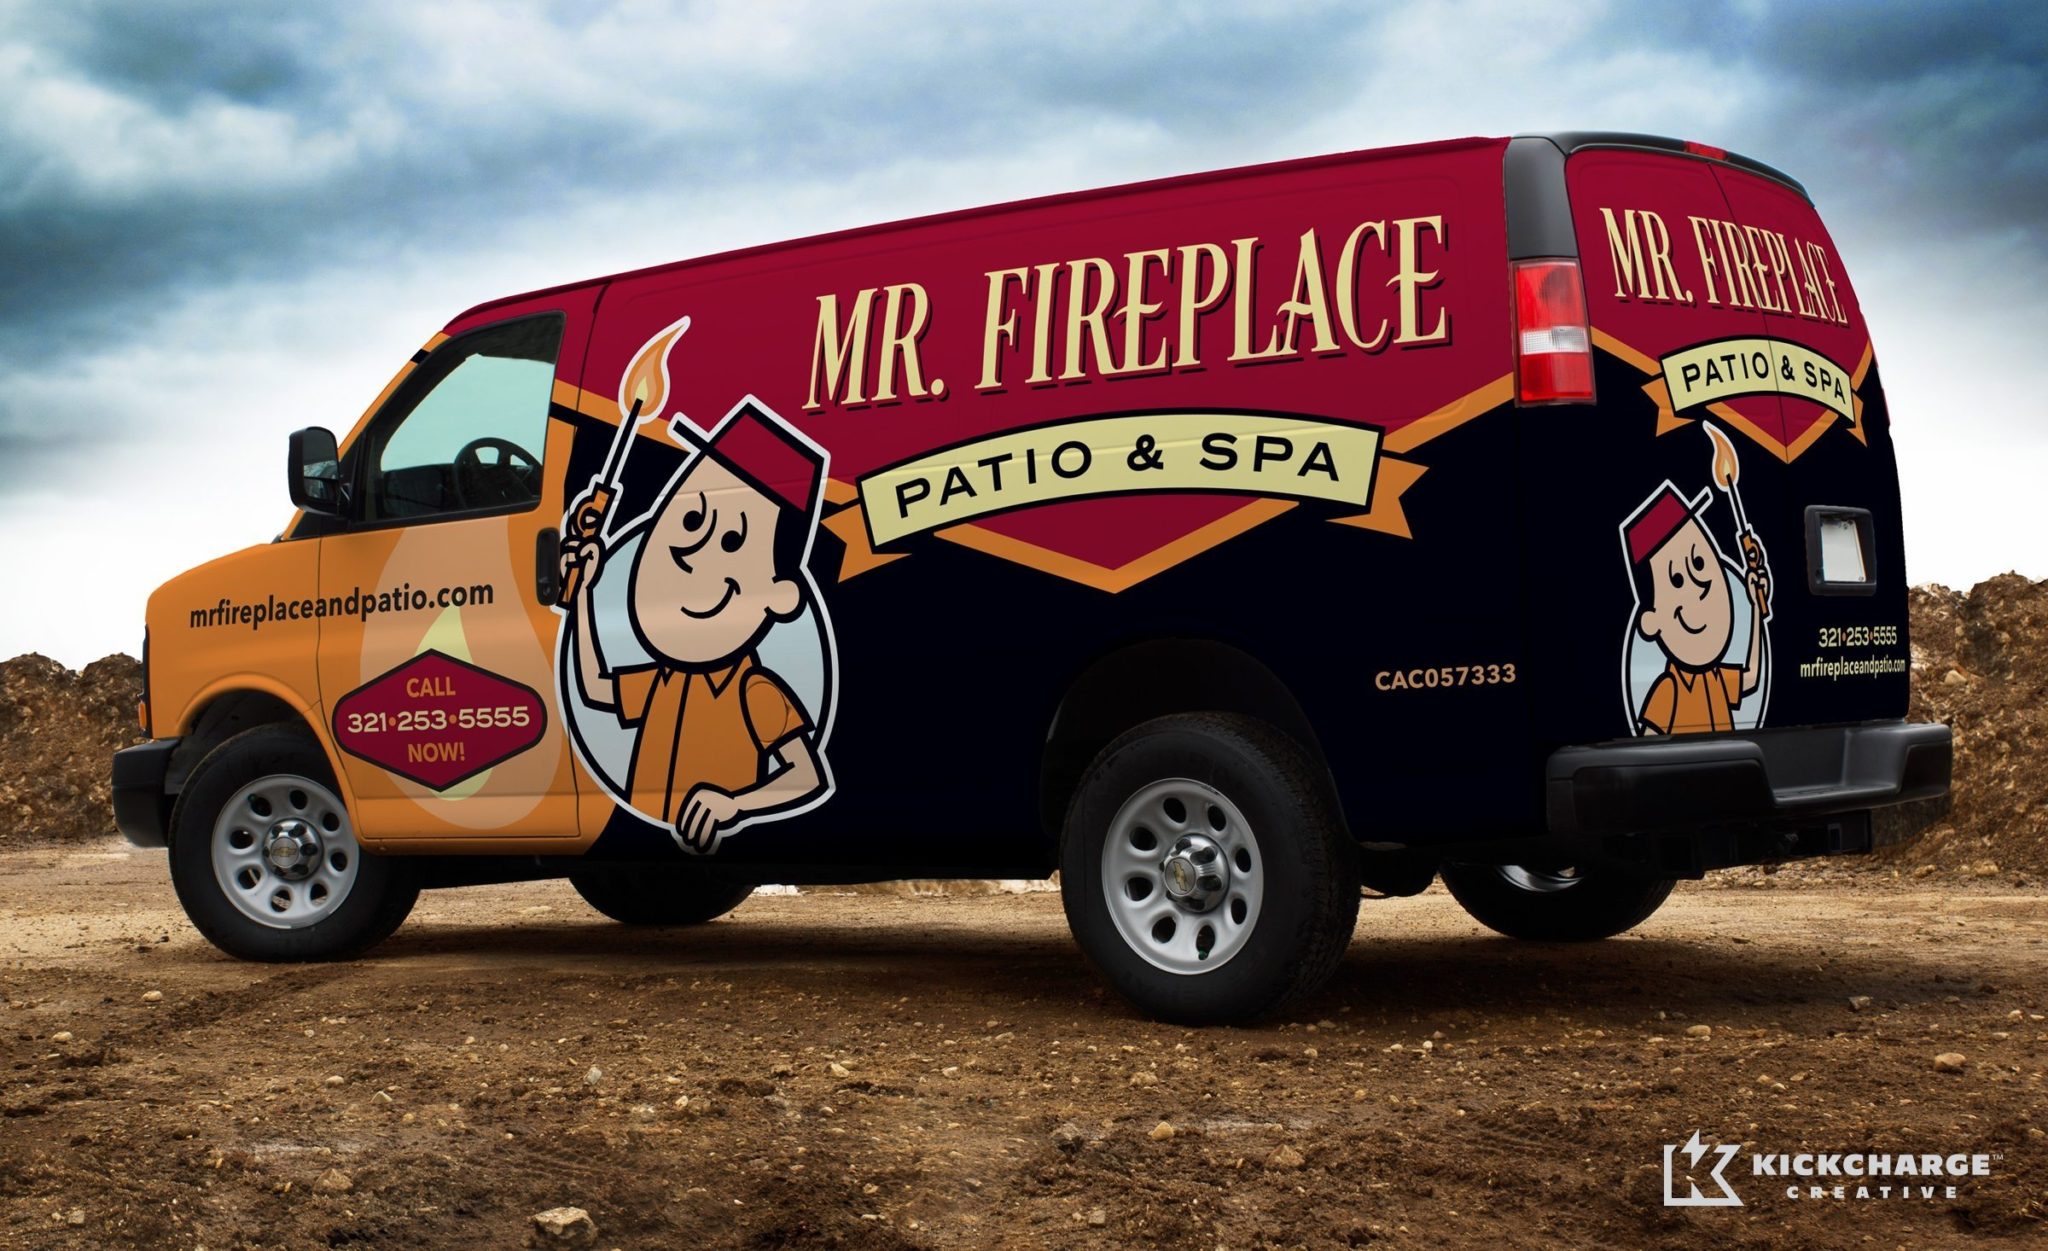 Retro vehicle wrap design for a fireplace, gas and spa company based in Florida.